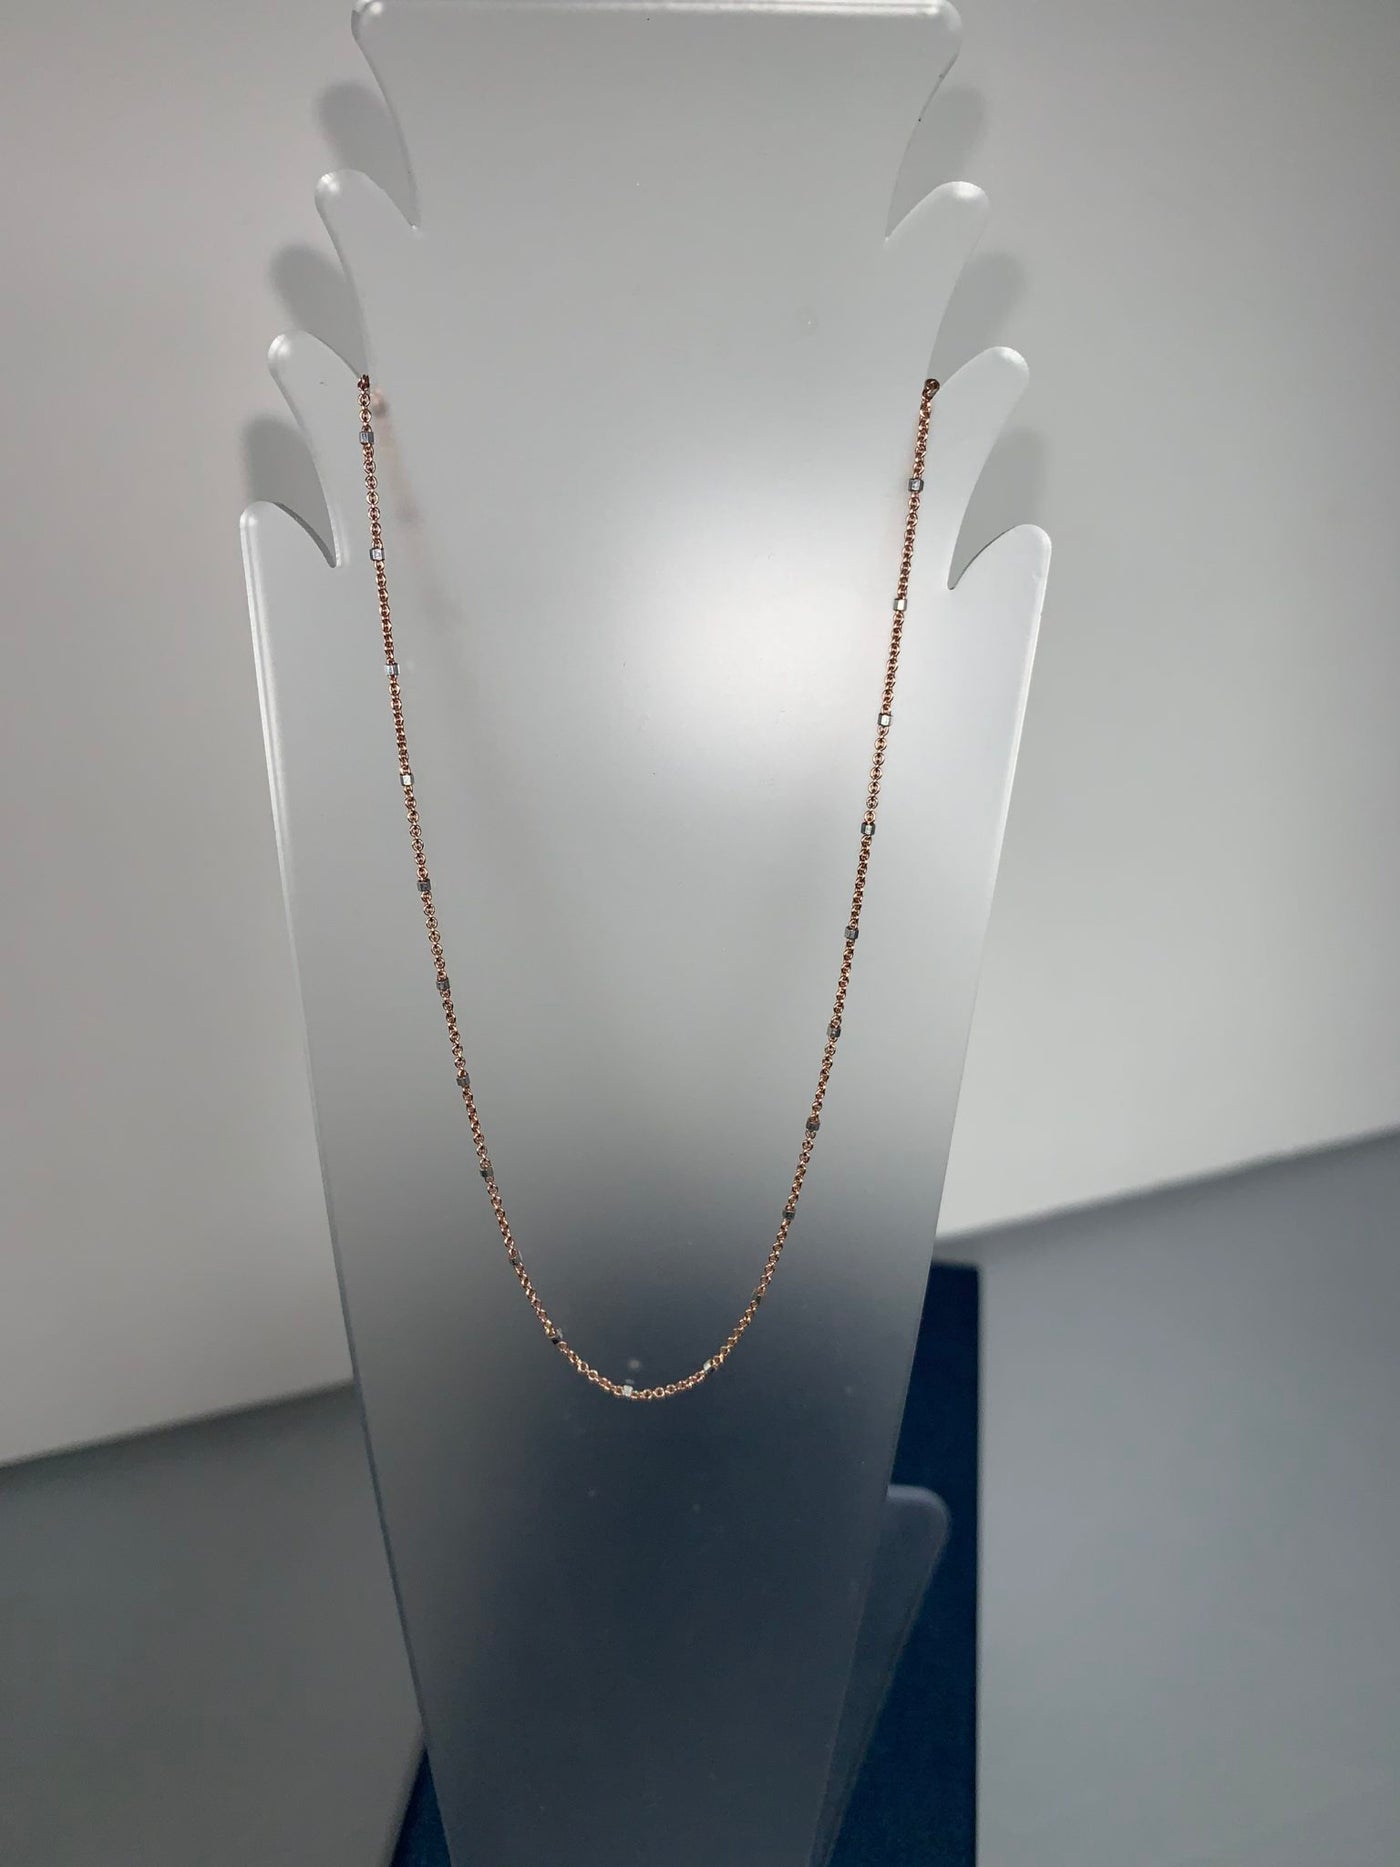 2-tone Sterling Silver Chain with Rose Gold Tone Coating in 18"